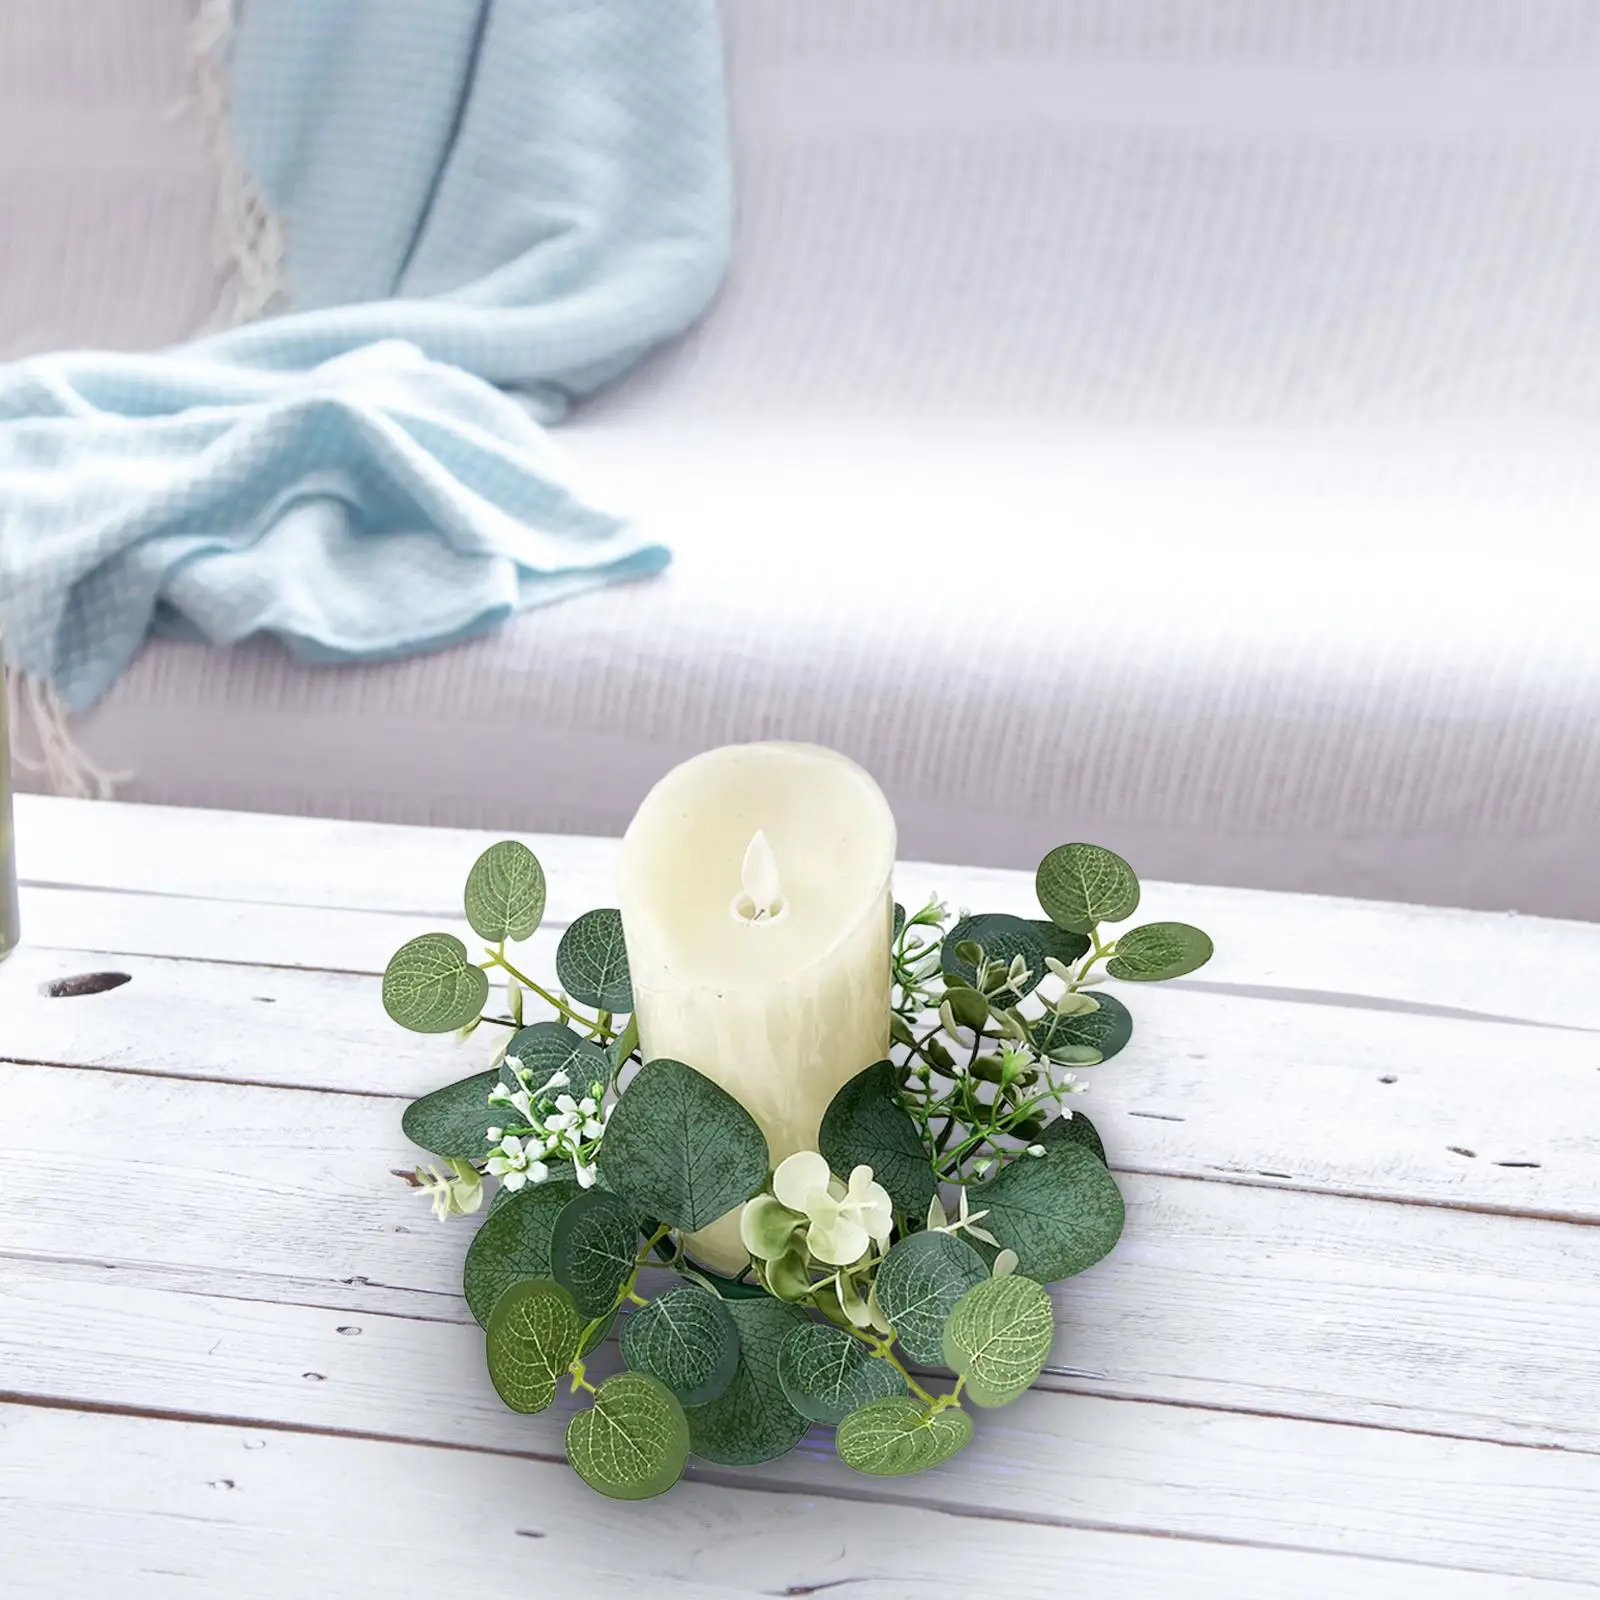 Candle Ring Artificial Eucalyptus Leaves Wreath Home Decor 9.8inch Small Boho Wreath for Farmhouse Kitchen Door Dining Room